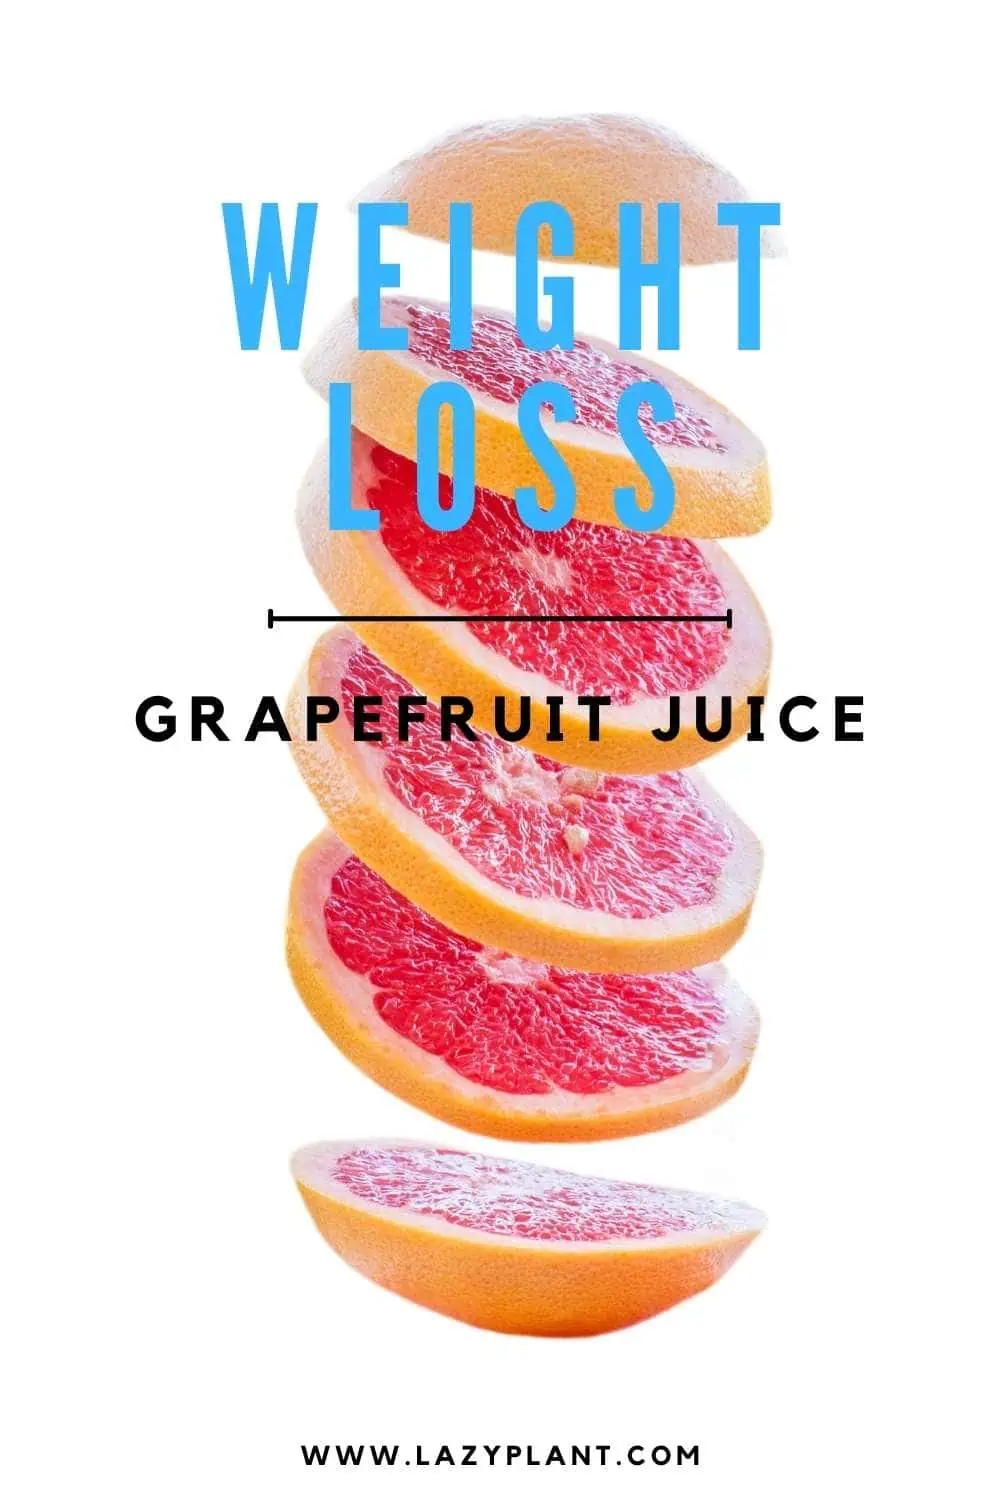 Can I drink grapefruit juice while dieting?